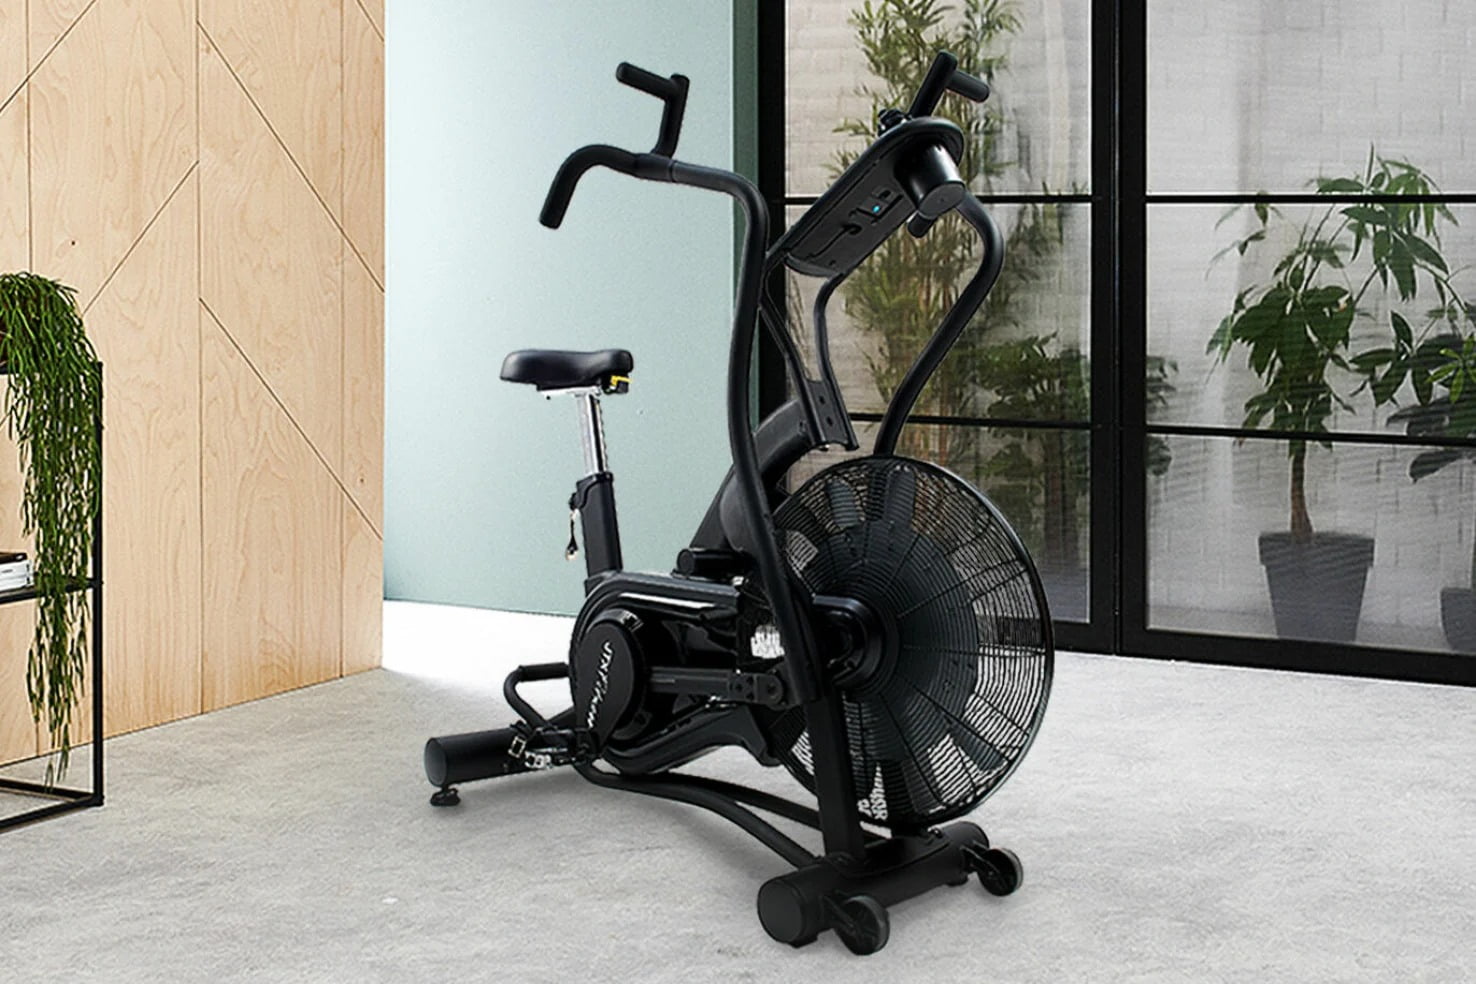 JTX Fitness Mission Air Bike Review in home gym